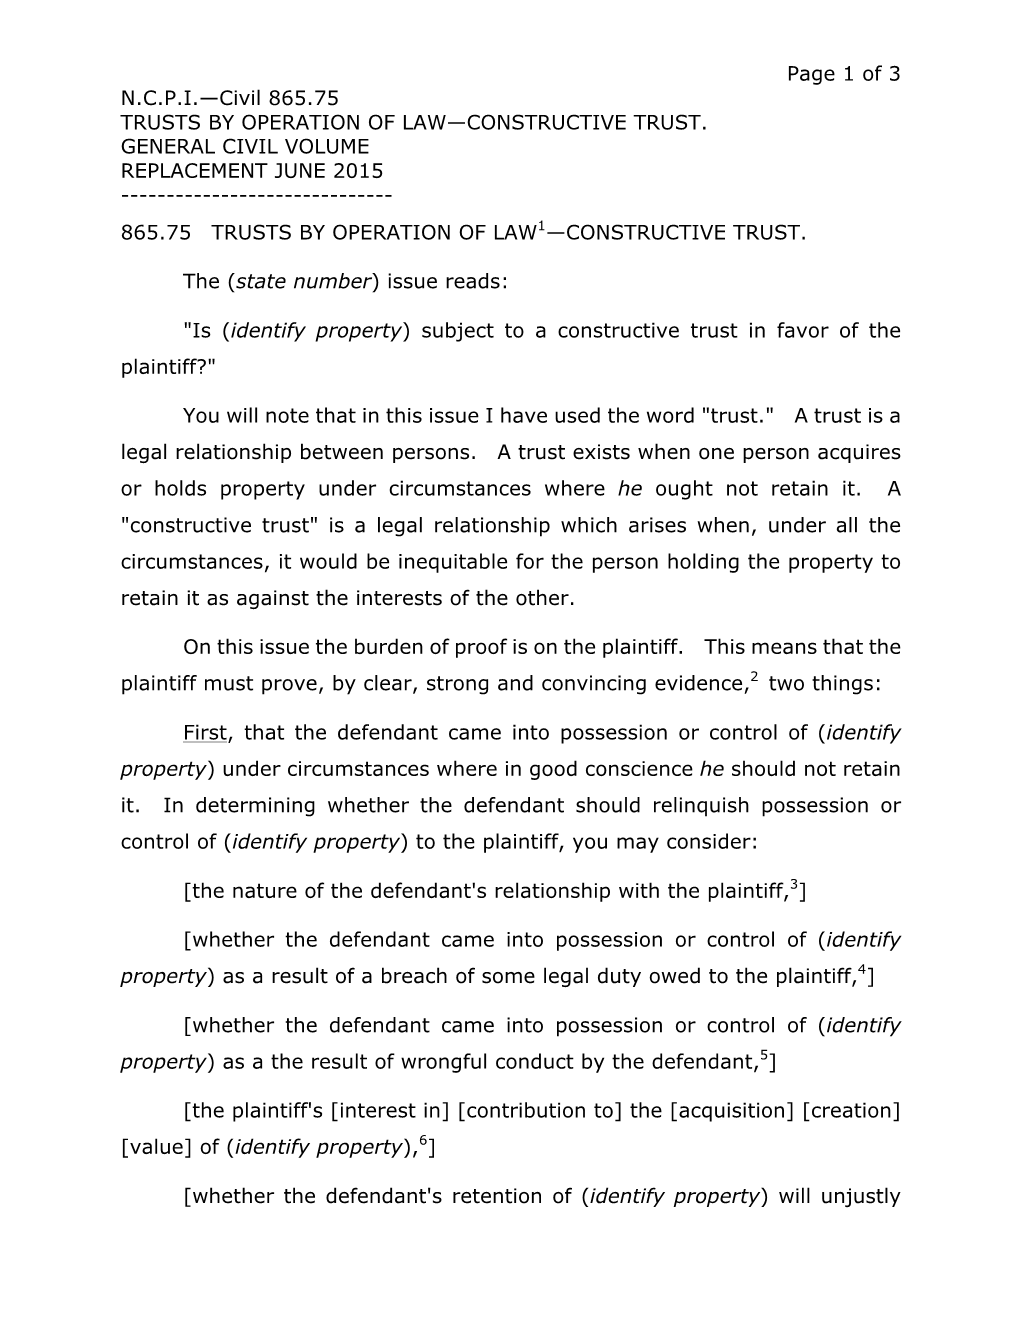 Page 1 of 3 N.C.P.I.—Civil 865.75 TRUSTS by OPERATION of LAW—CONSTRUCTIVE TRUST. GENERAL CIVIL VOLUME REPLACEMENT JUNE 2015